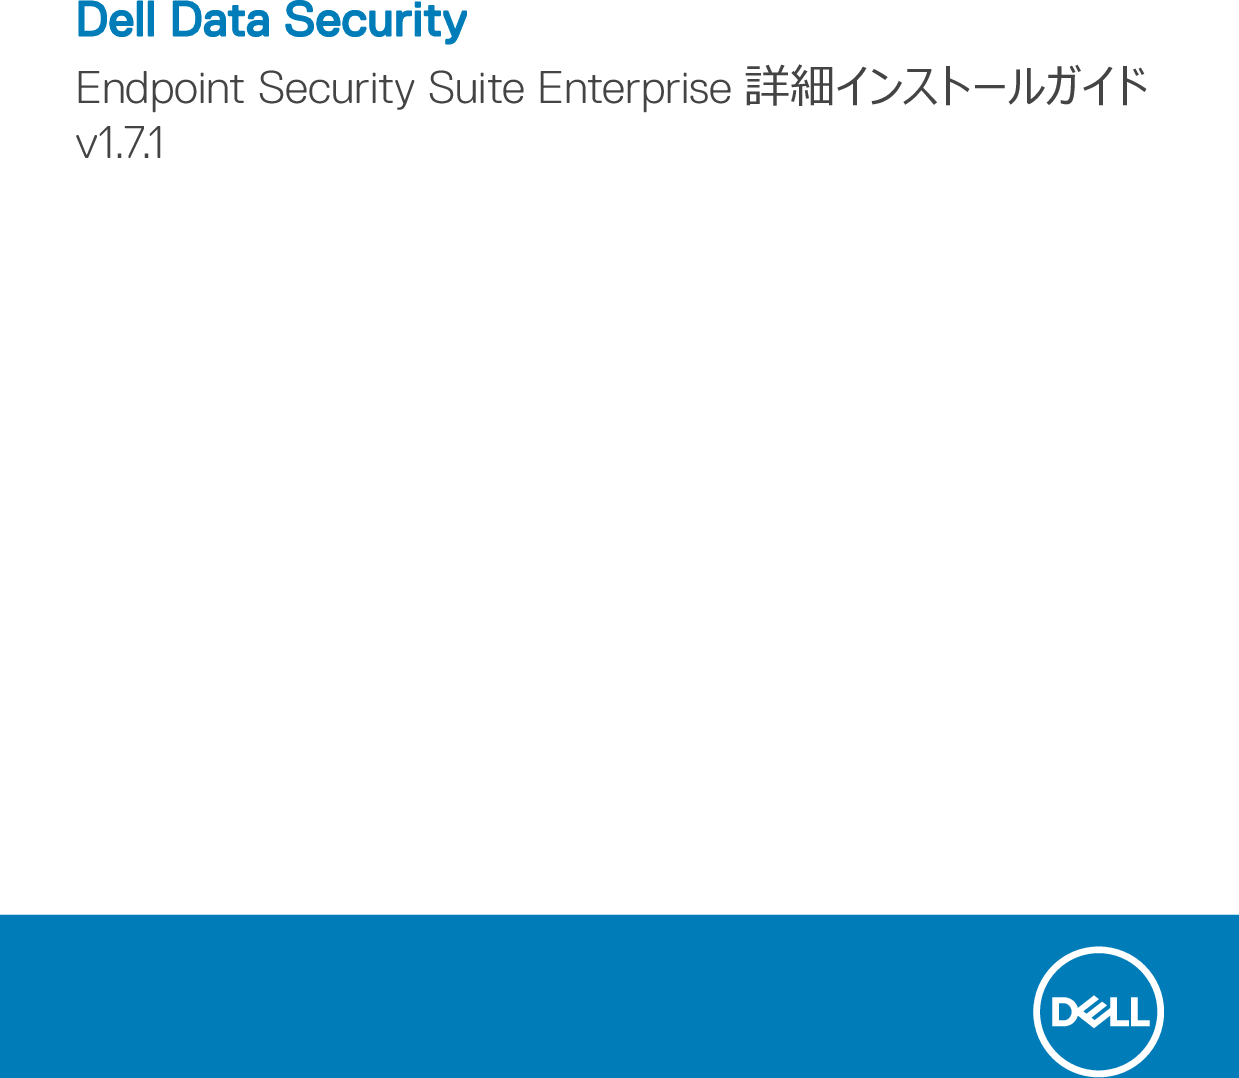 Dell Dp Endpt Security Suite Enterprise Data Endpoint 詳細インストールガイド V1 7 1 User Manual その他の文書 Install Guide Ja Jp